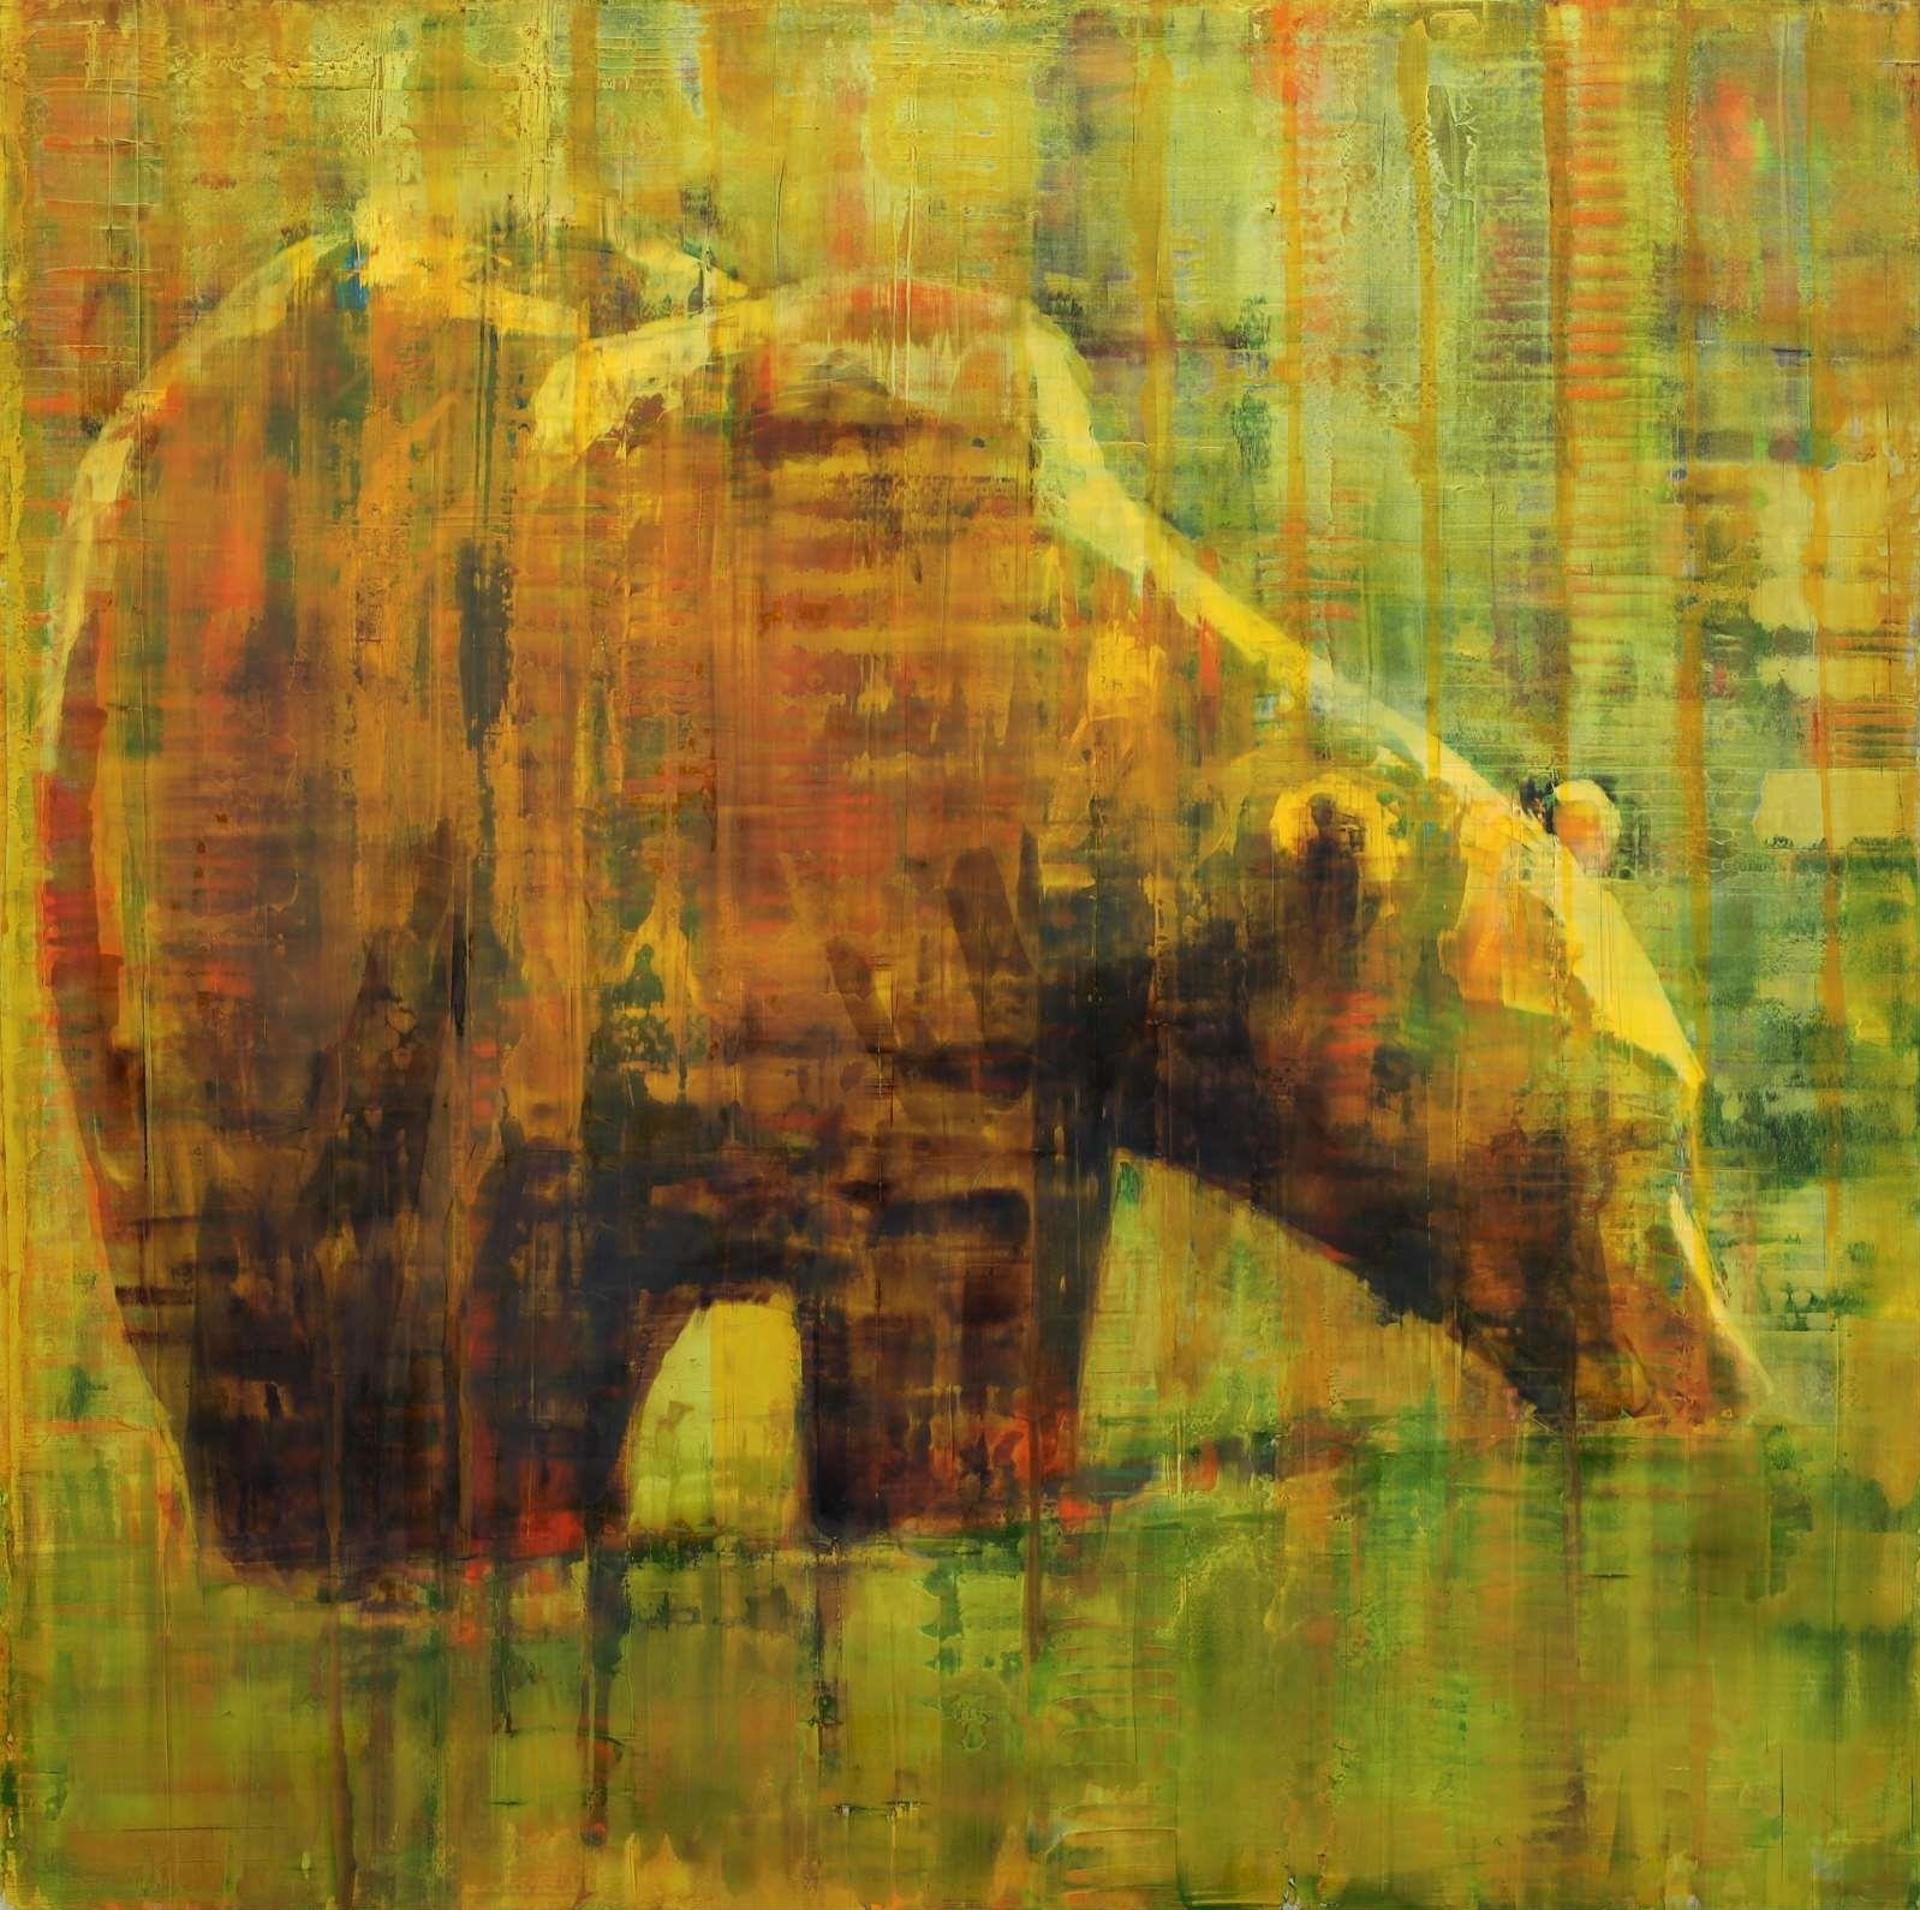 Les Thomas (1962) - Animal Painting #10-0023 (Grizzly); 2010